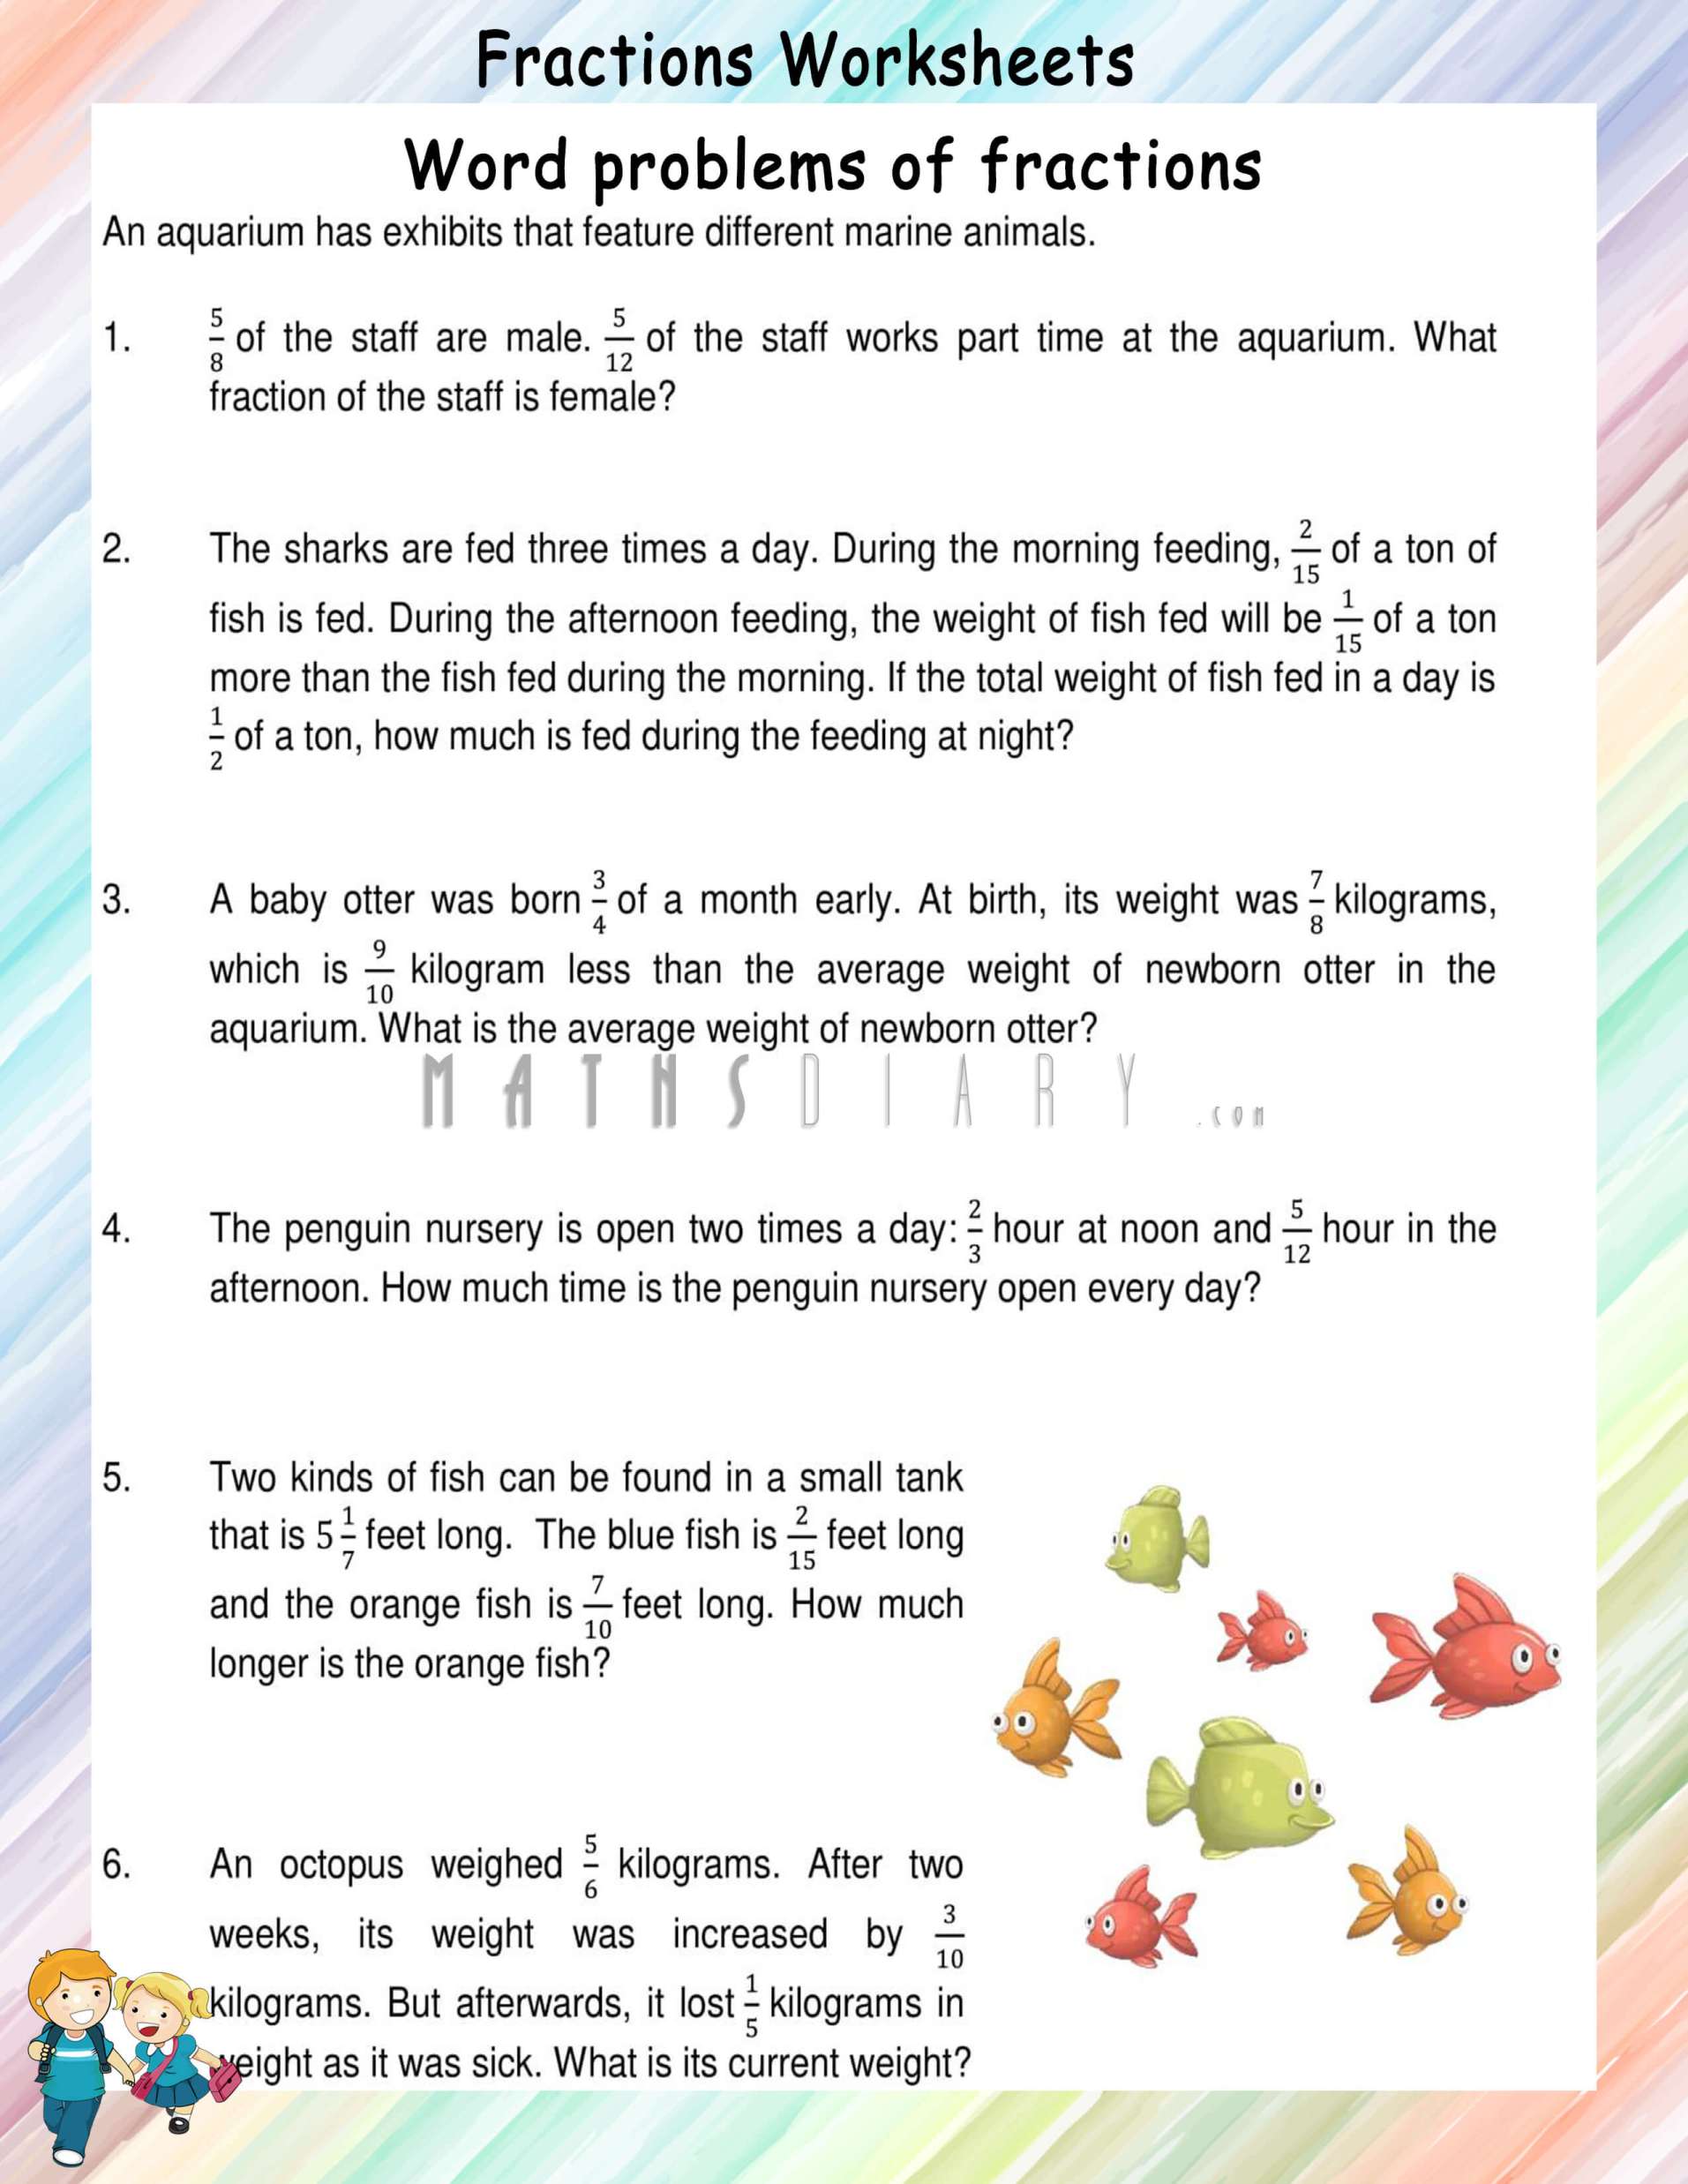 division-word-problems-worksheets-basic-division-word-problems